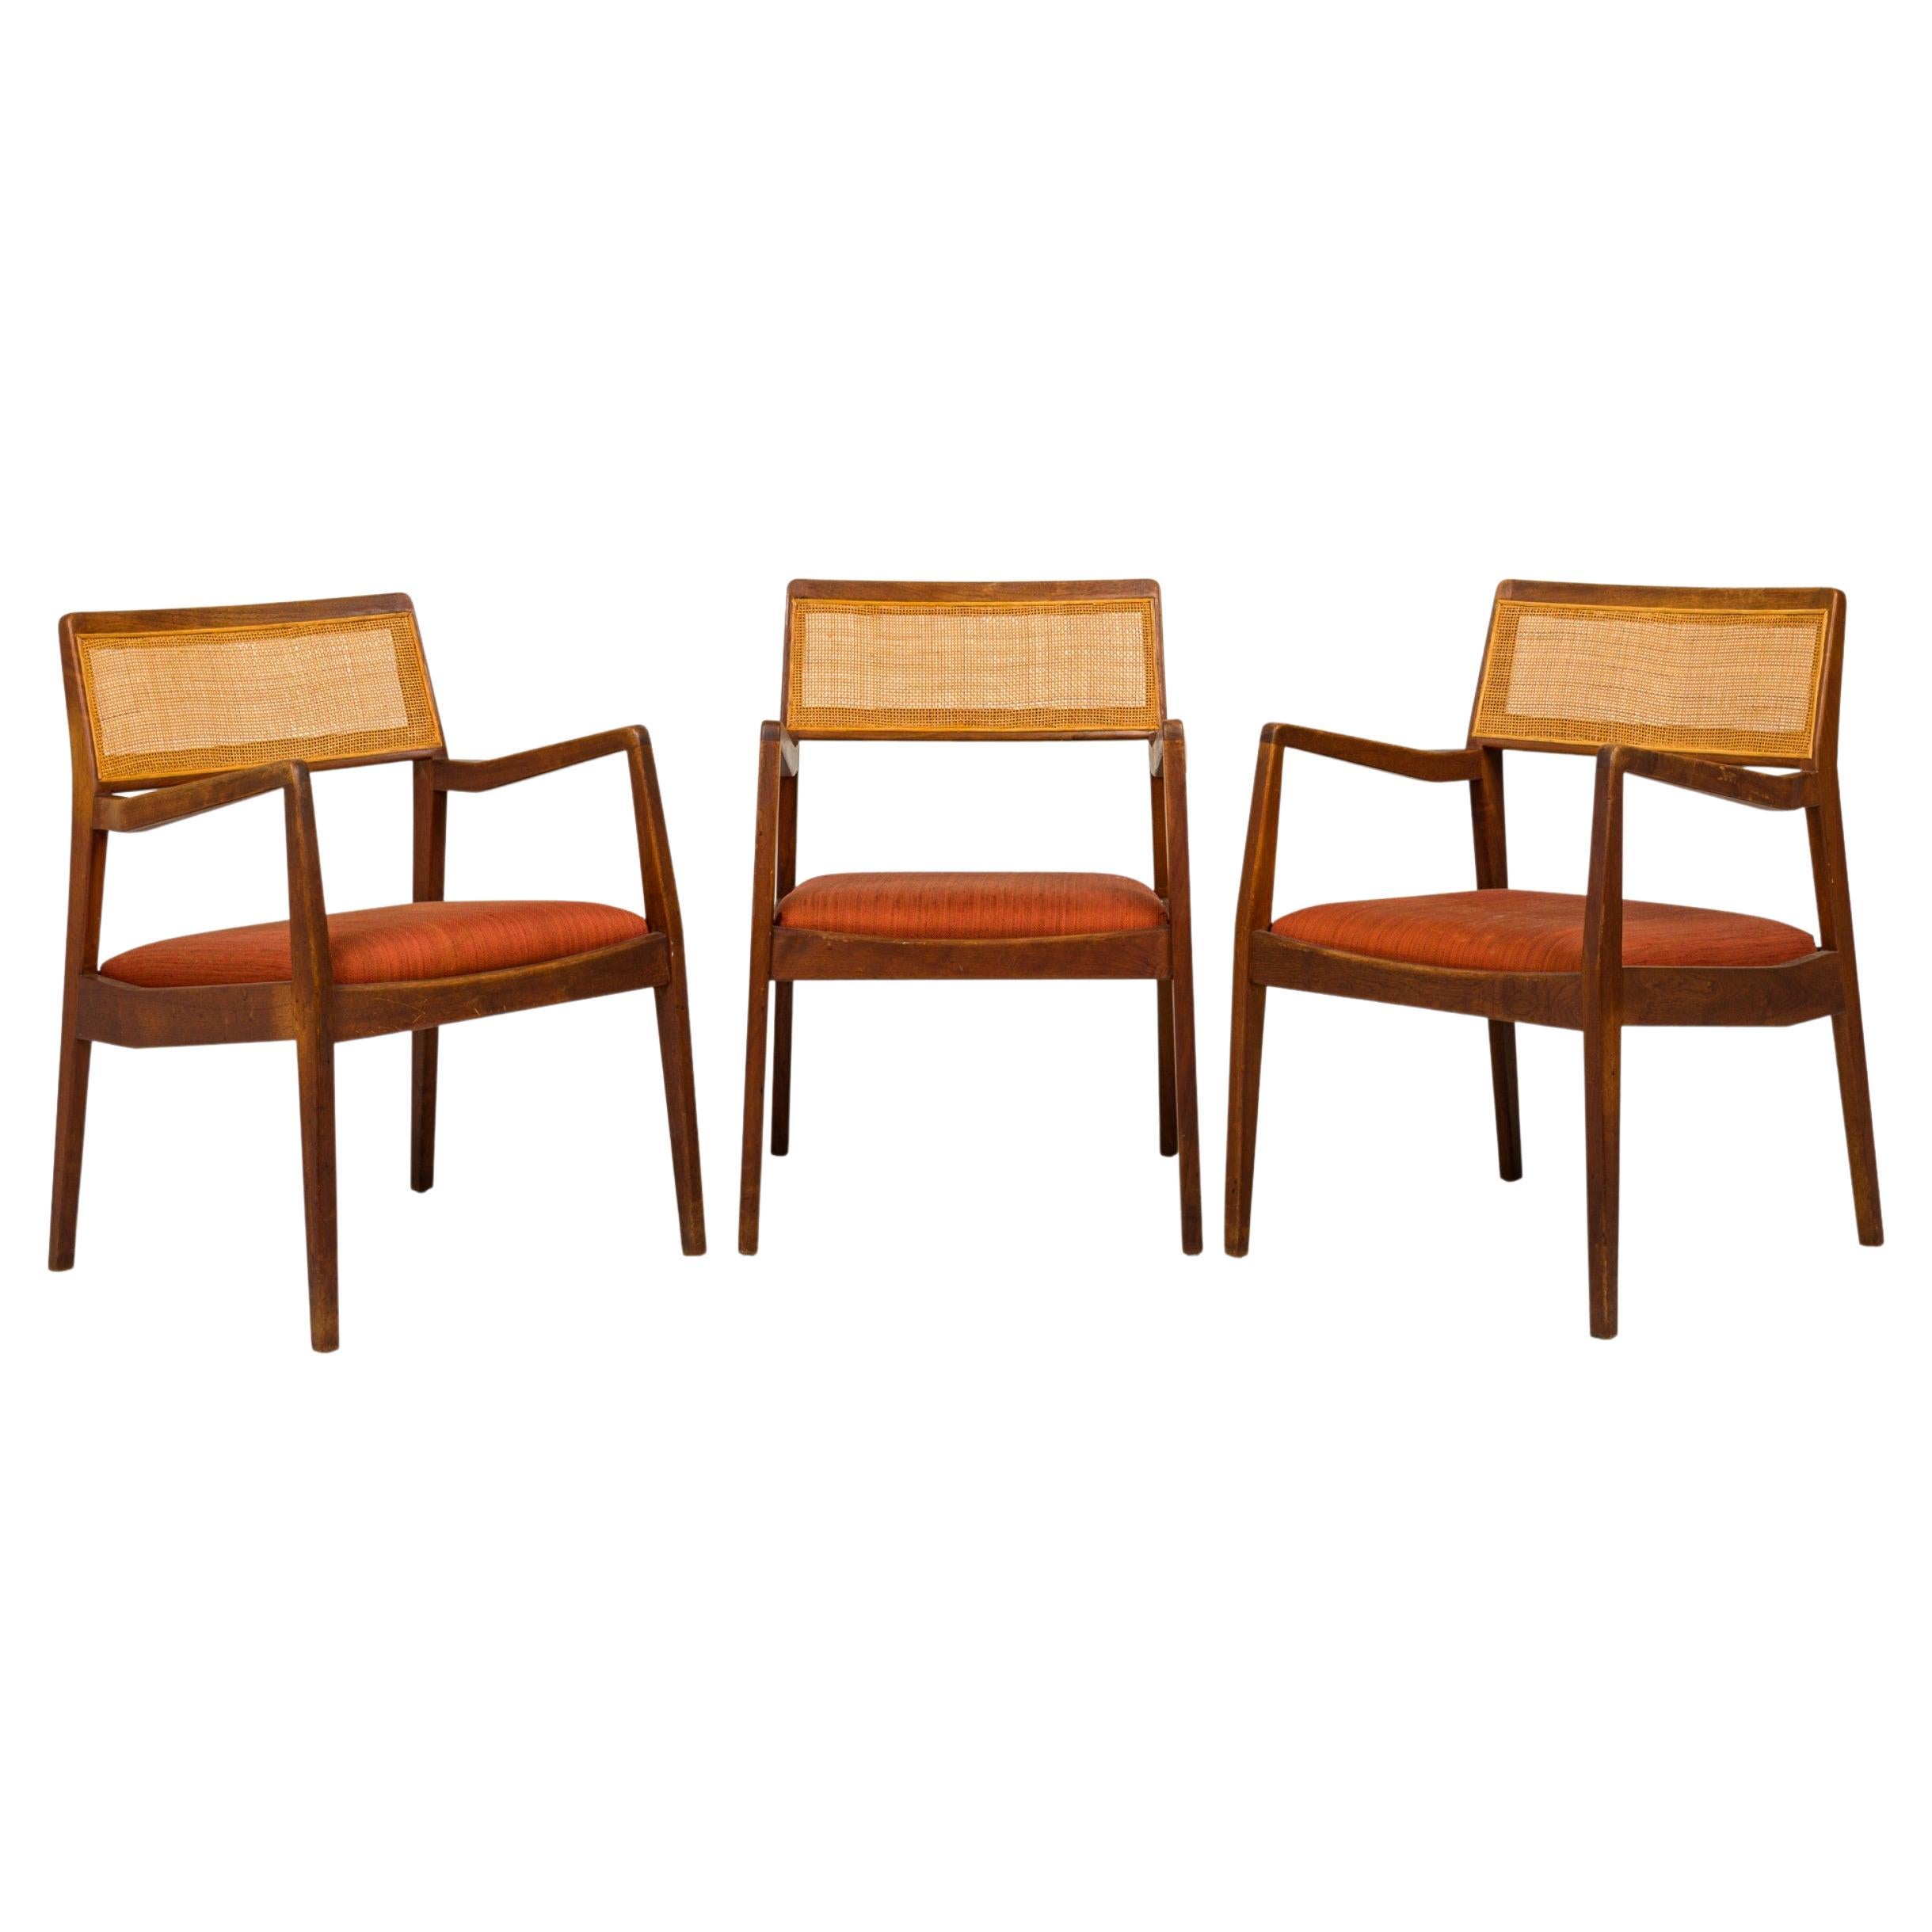 Jens Risom Teak, Caning, and Orange Upholstery Conference Armchairs For Sale